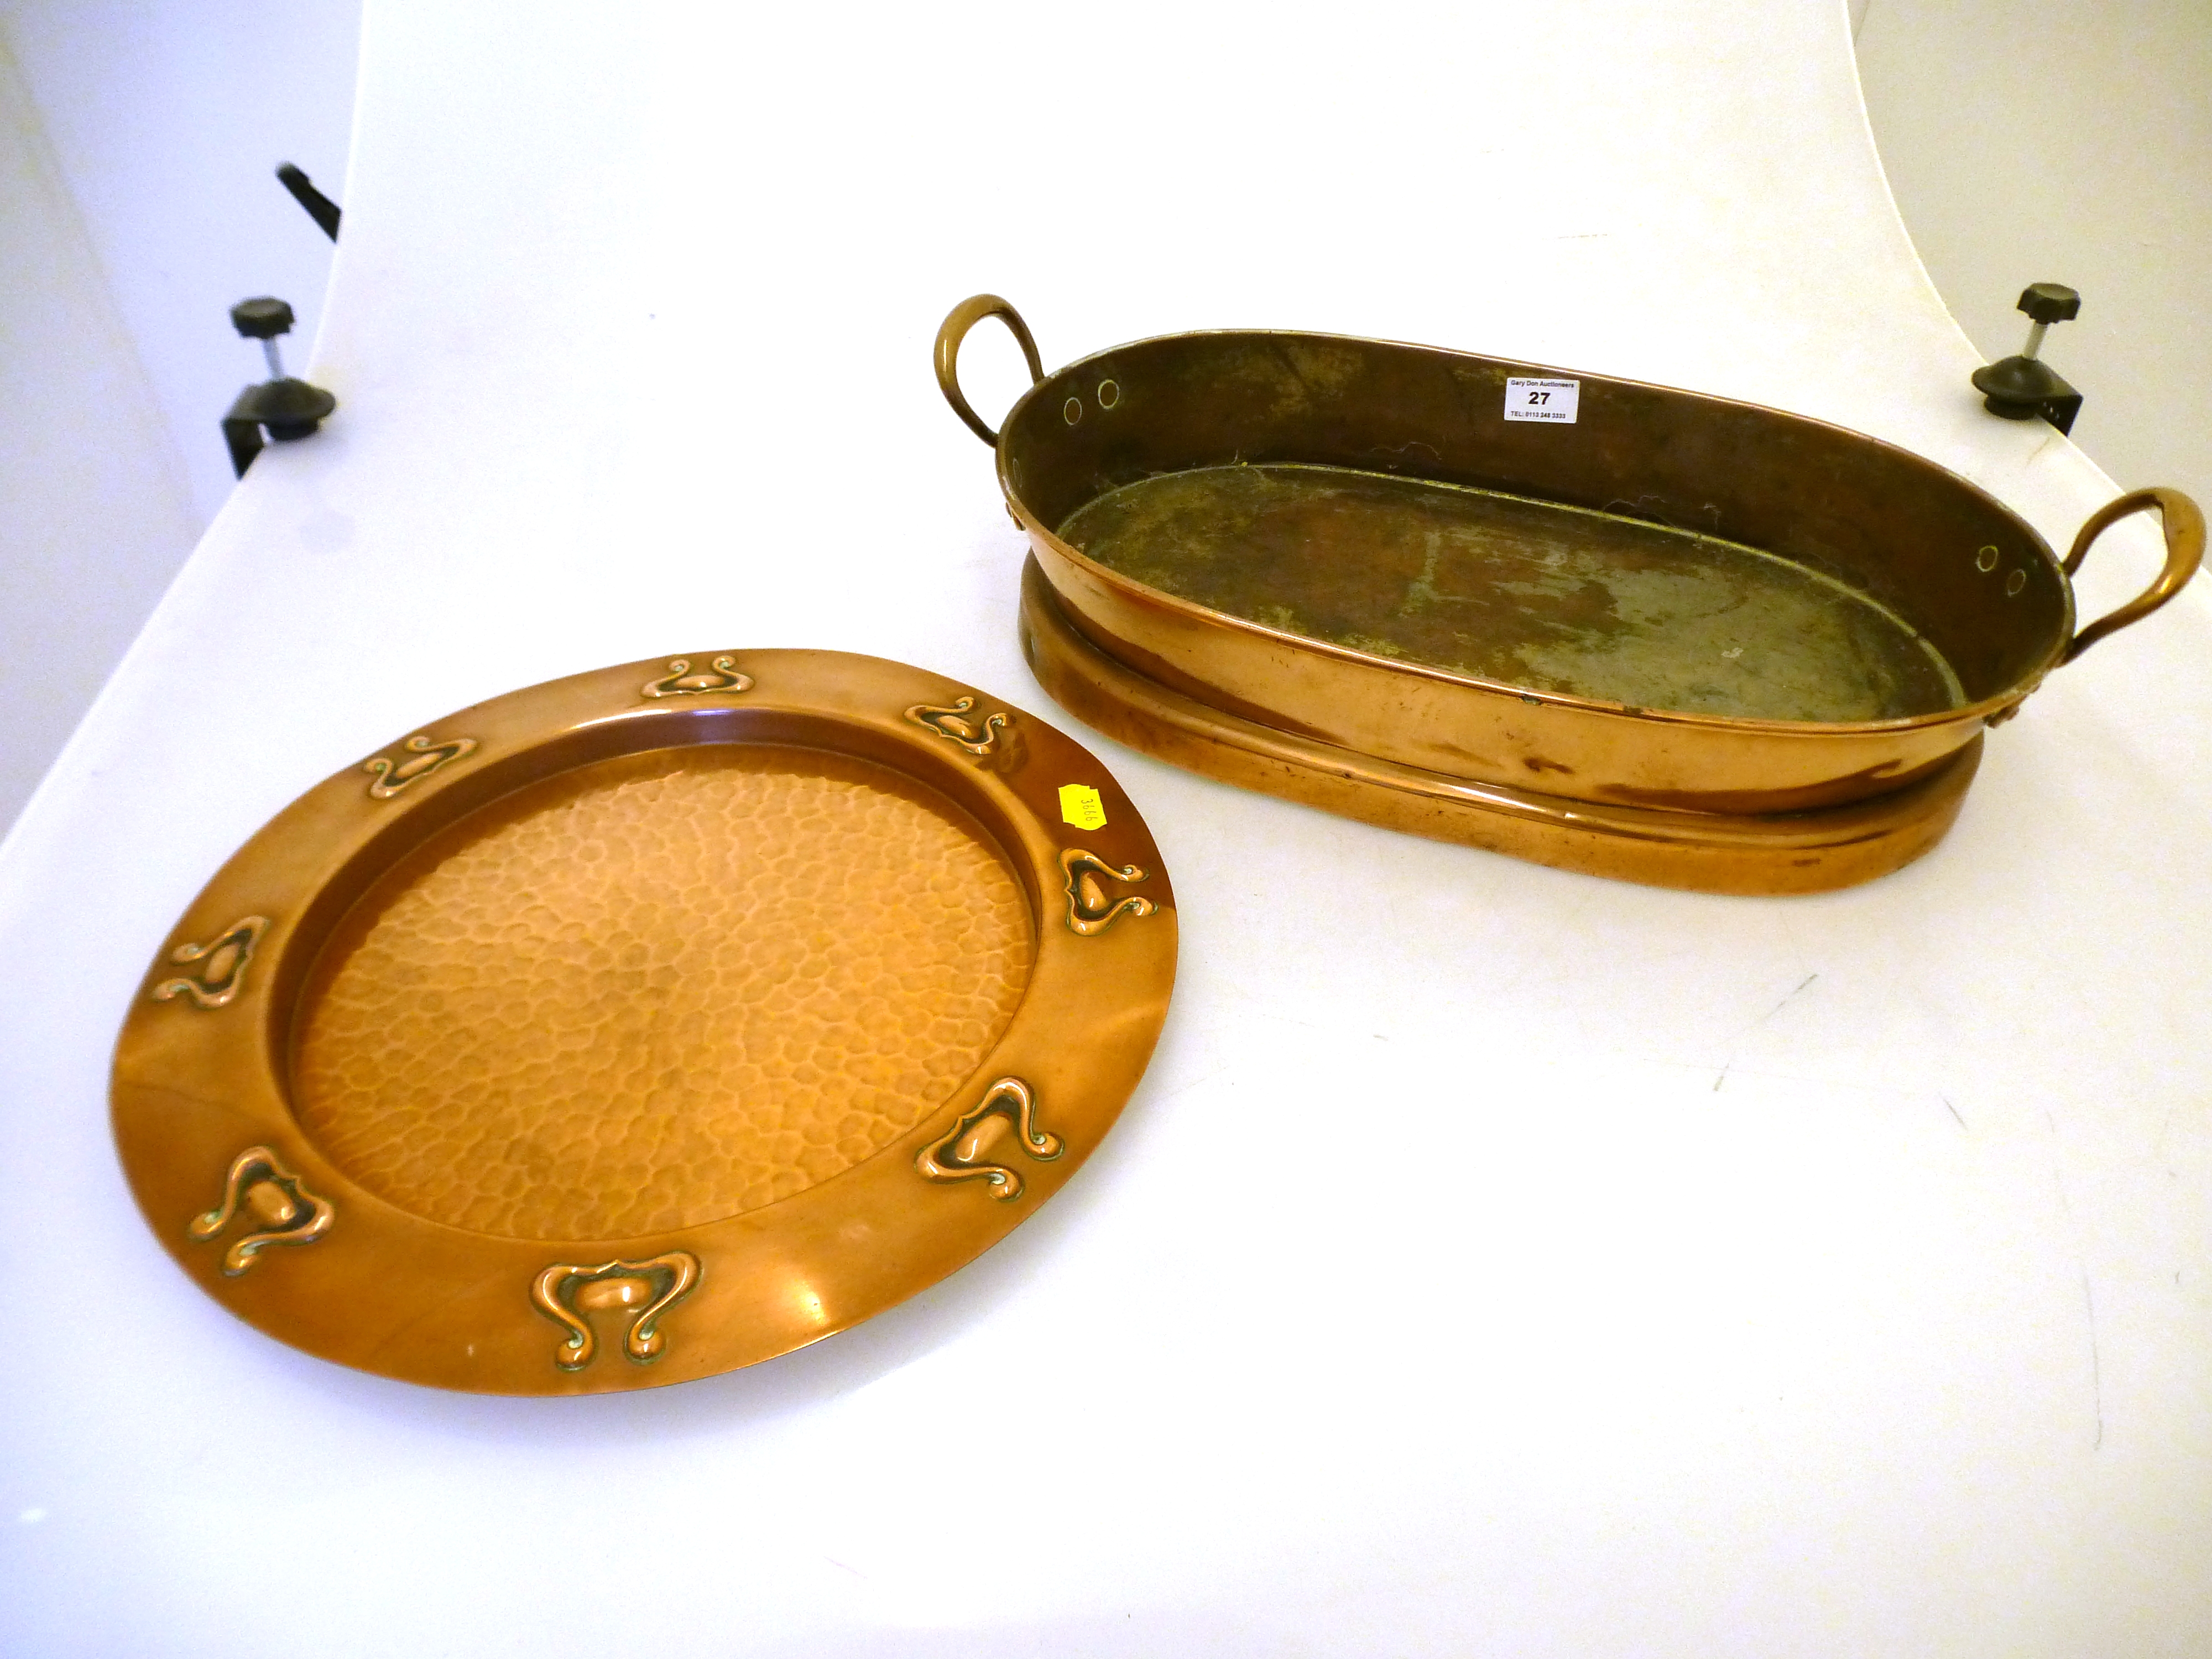 COPPER DISH (19.5" X 10.5") AND COPPER CHARGER (D: 14.5")